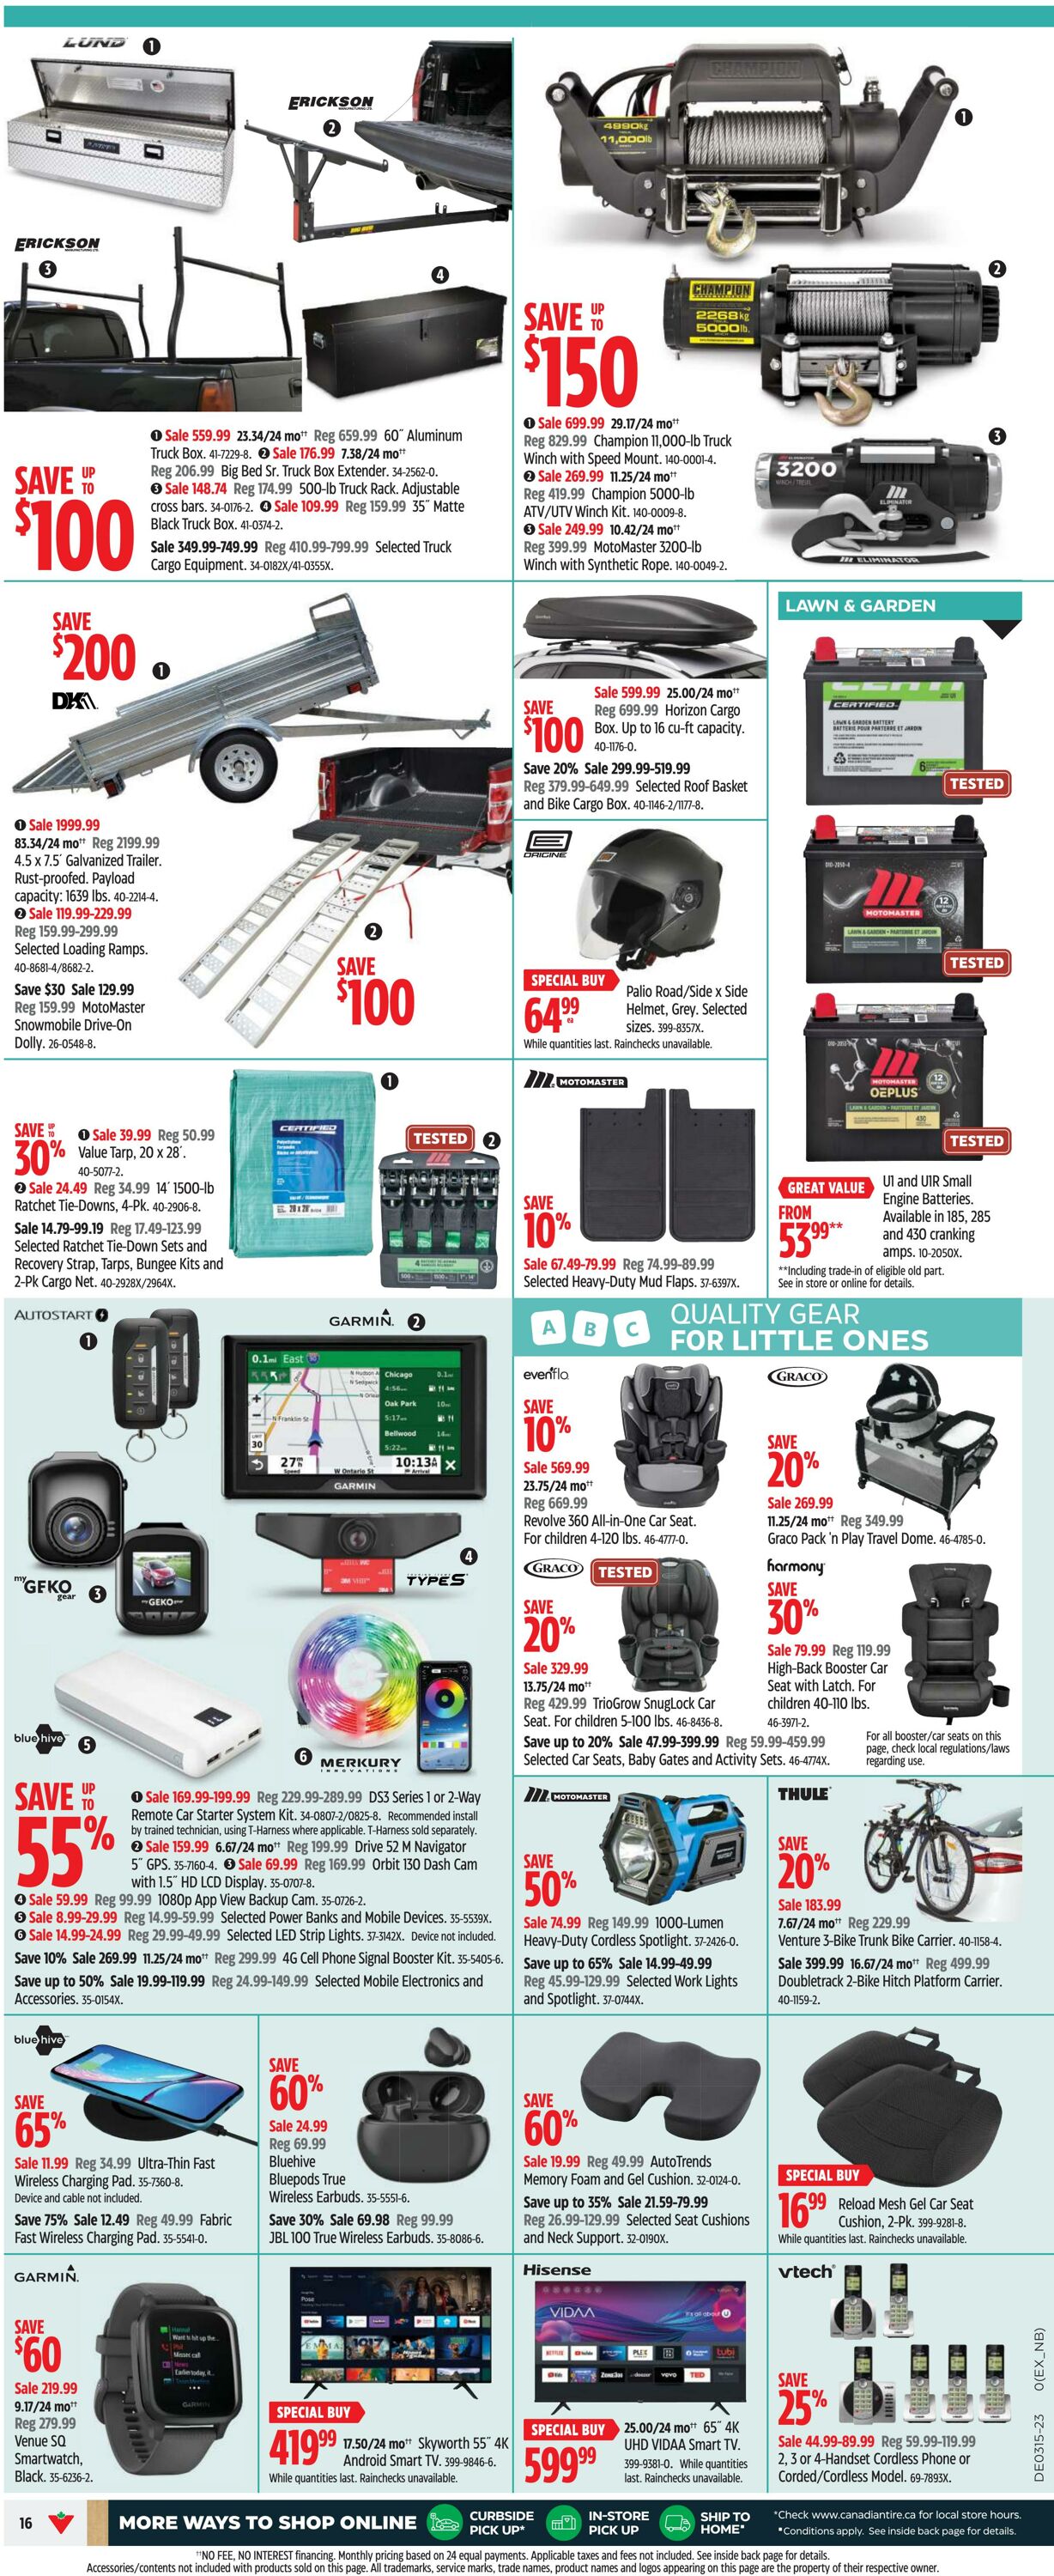 Canadian Tire Promotional Flyer Easter Valid from 06.04 to 12.04